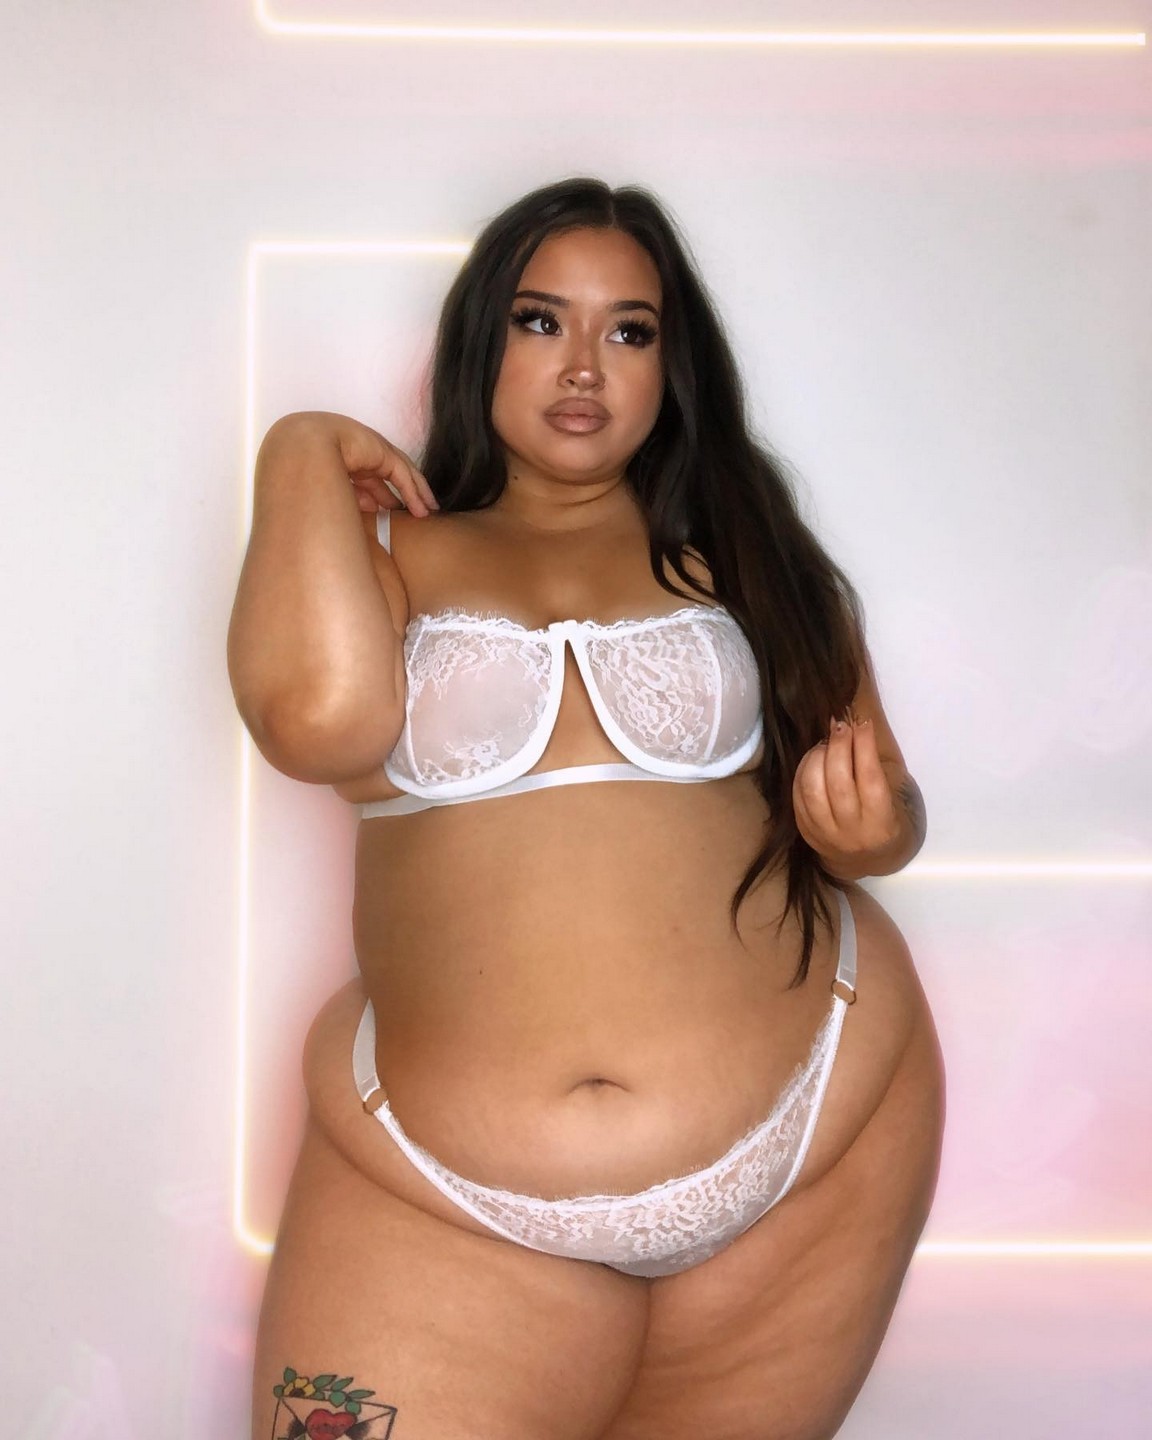 Erika Lipps Sexy In Lingerie TheFappening.Pro 5 - Erika Lipps Real Jabba Girl (29 Photos)